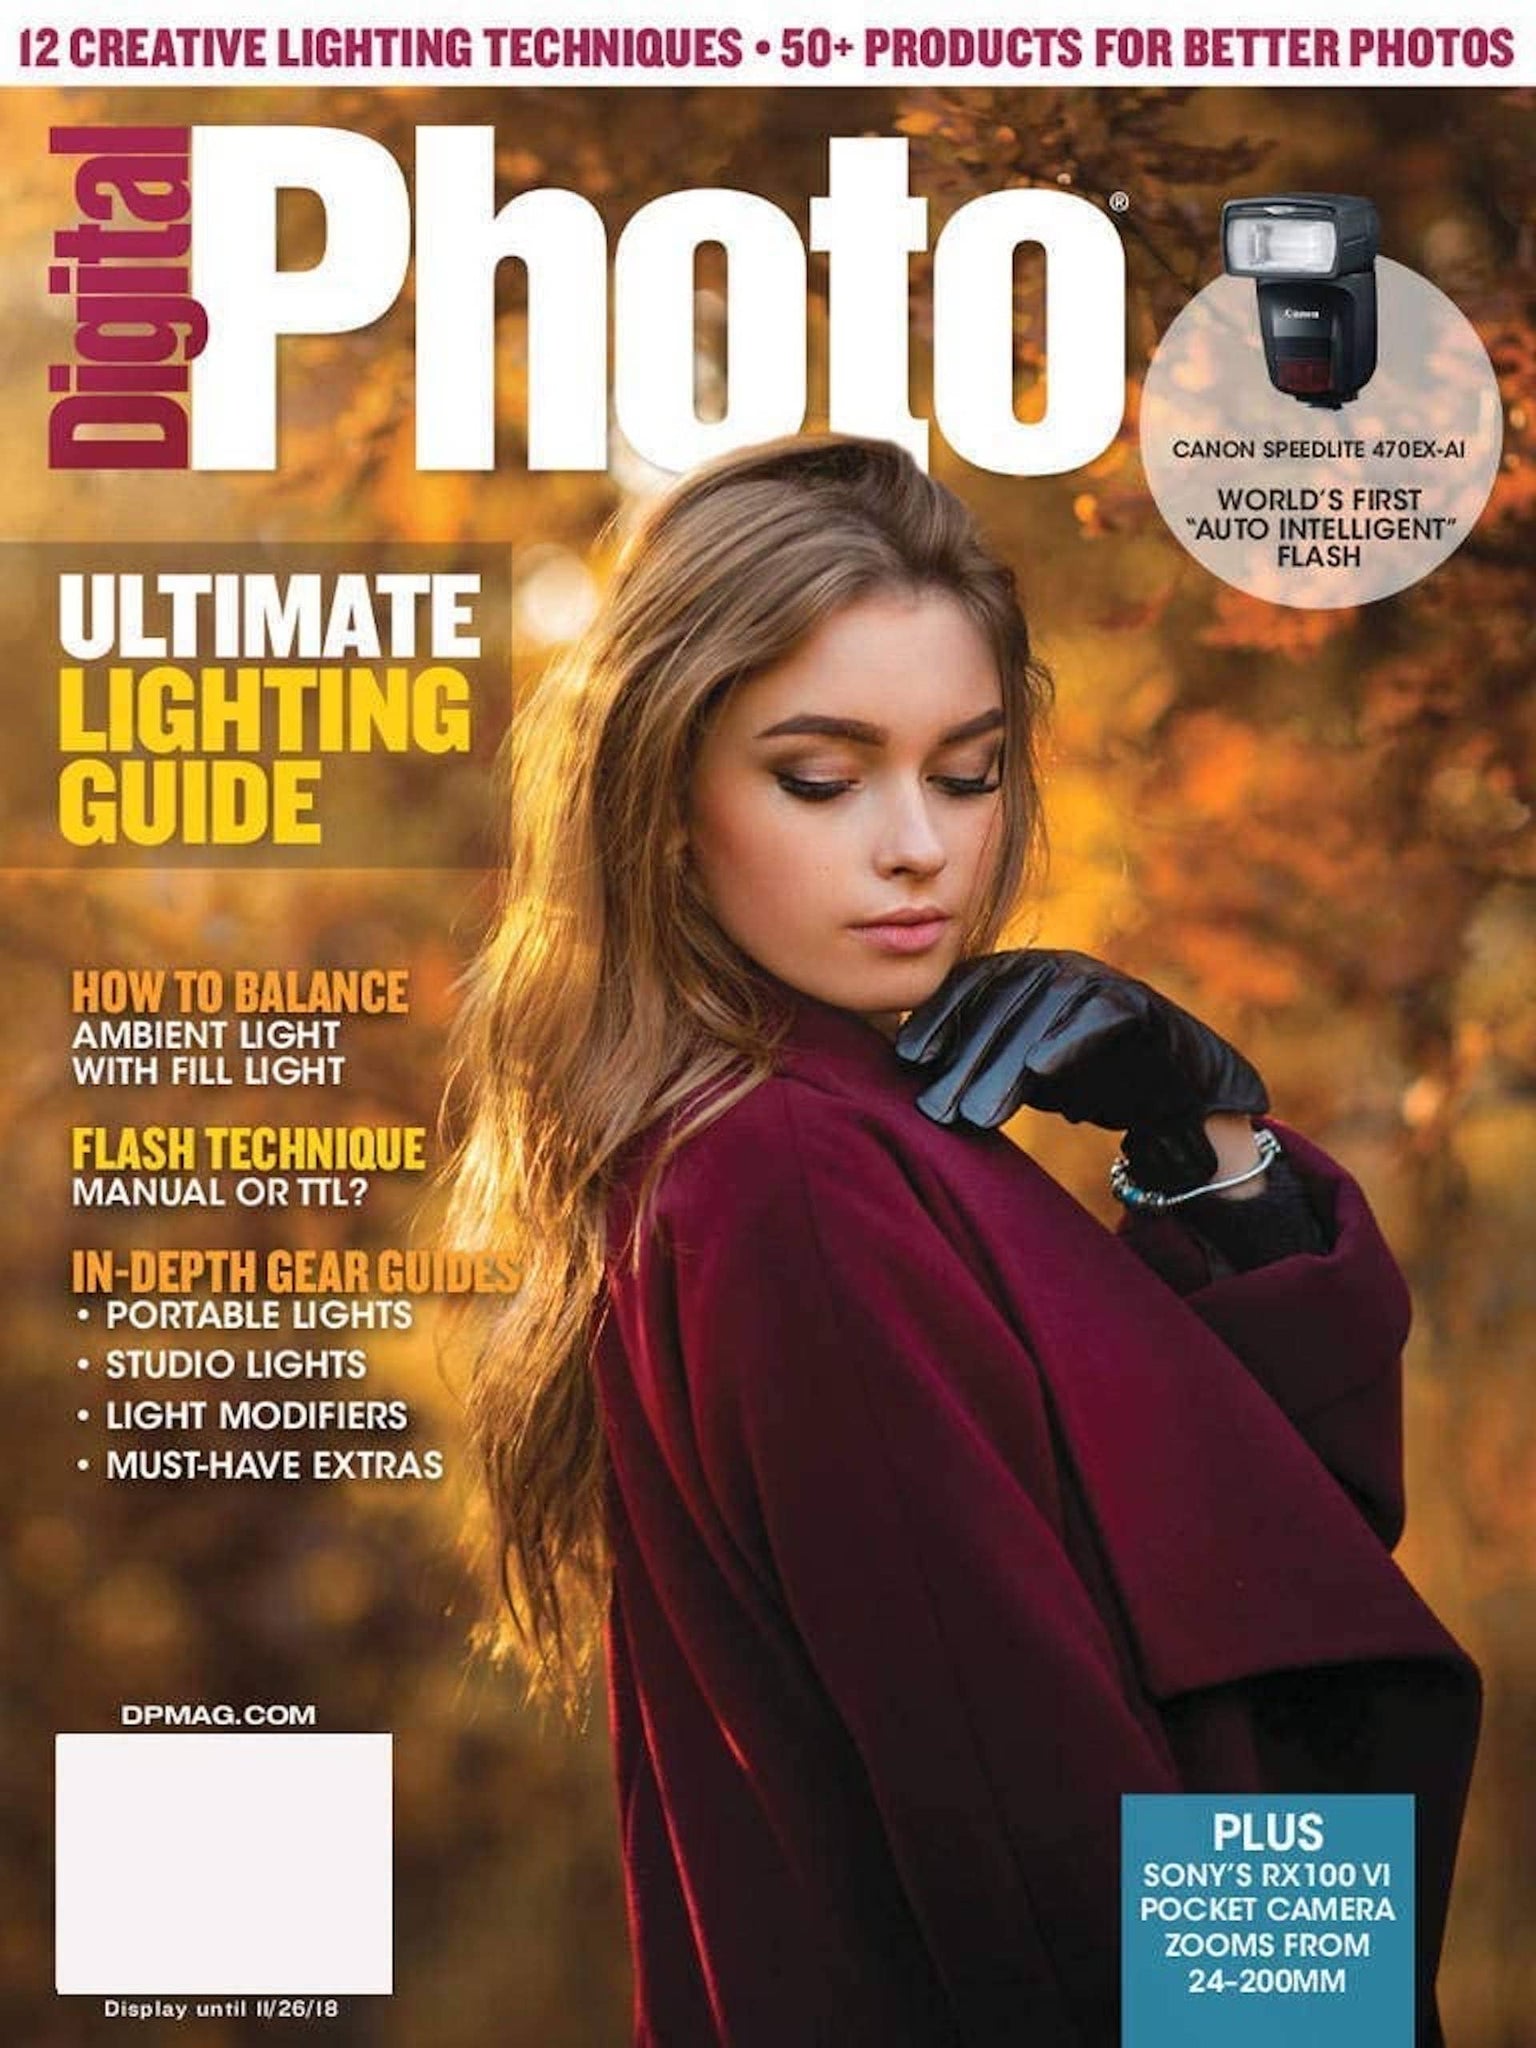 Best Photo Gifts for Photographers - Ideas Photographer Lovers - Digital Photography Magazine